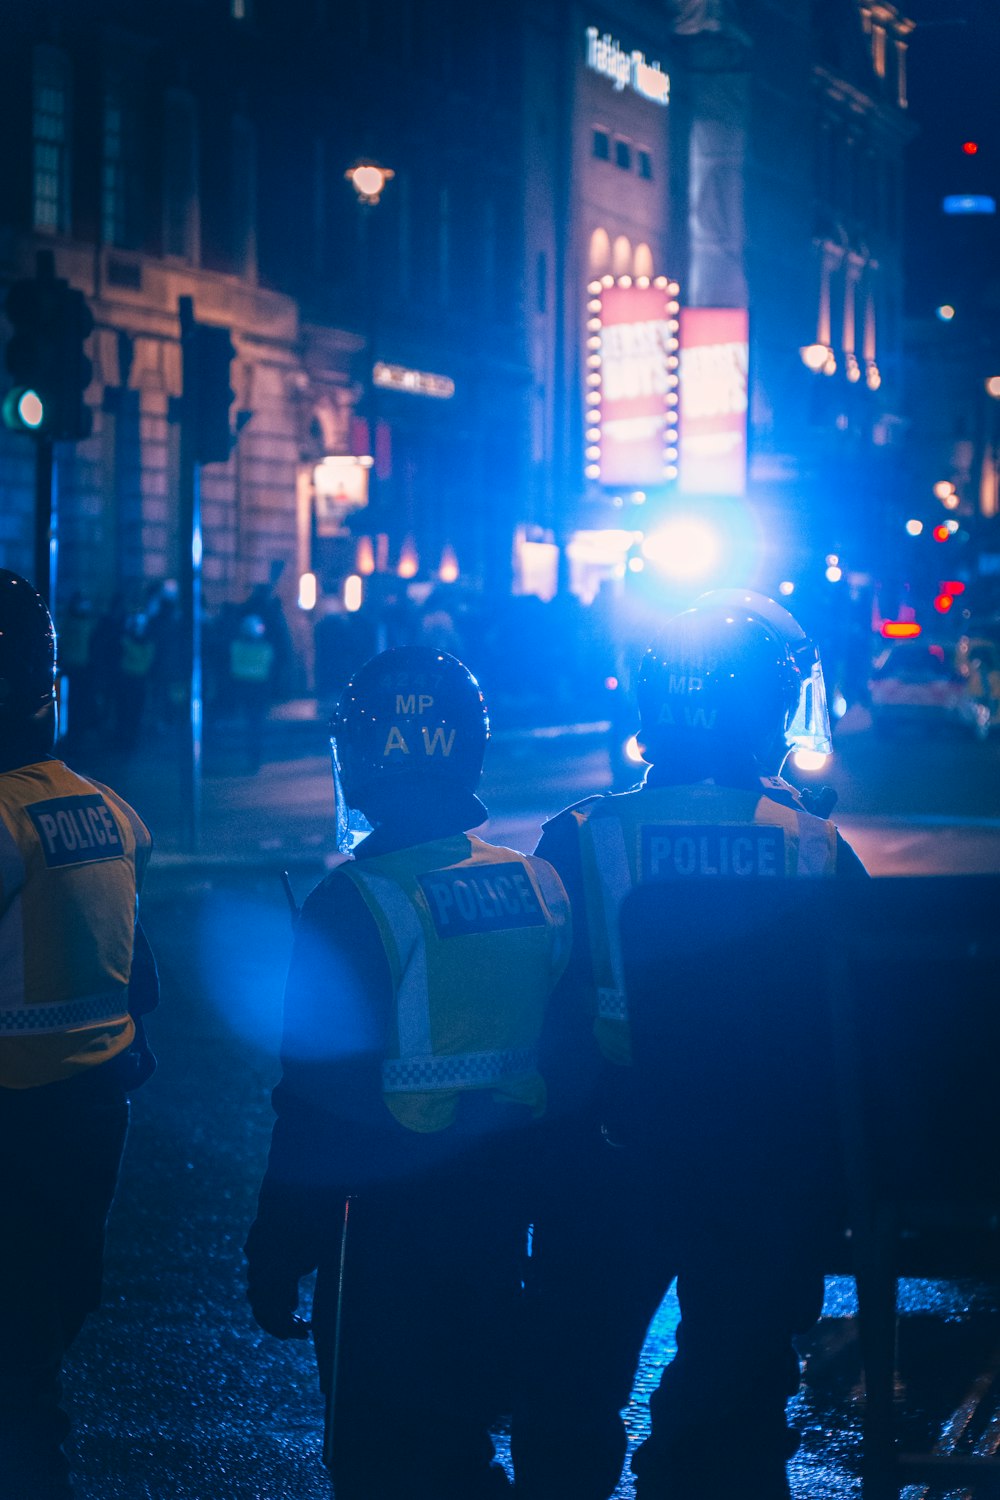 two police officers standing in the street at night